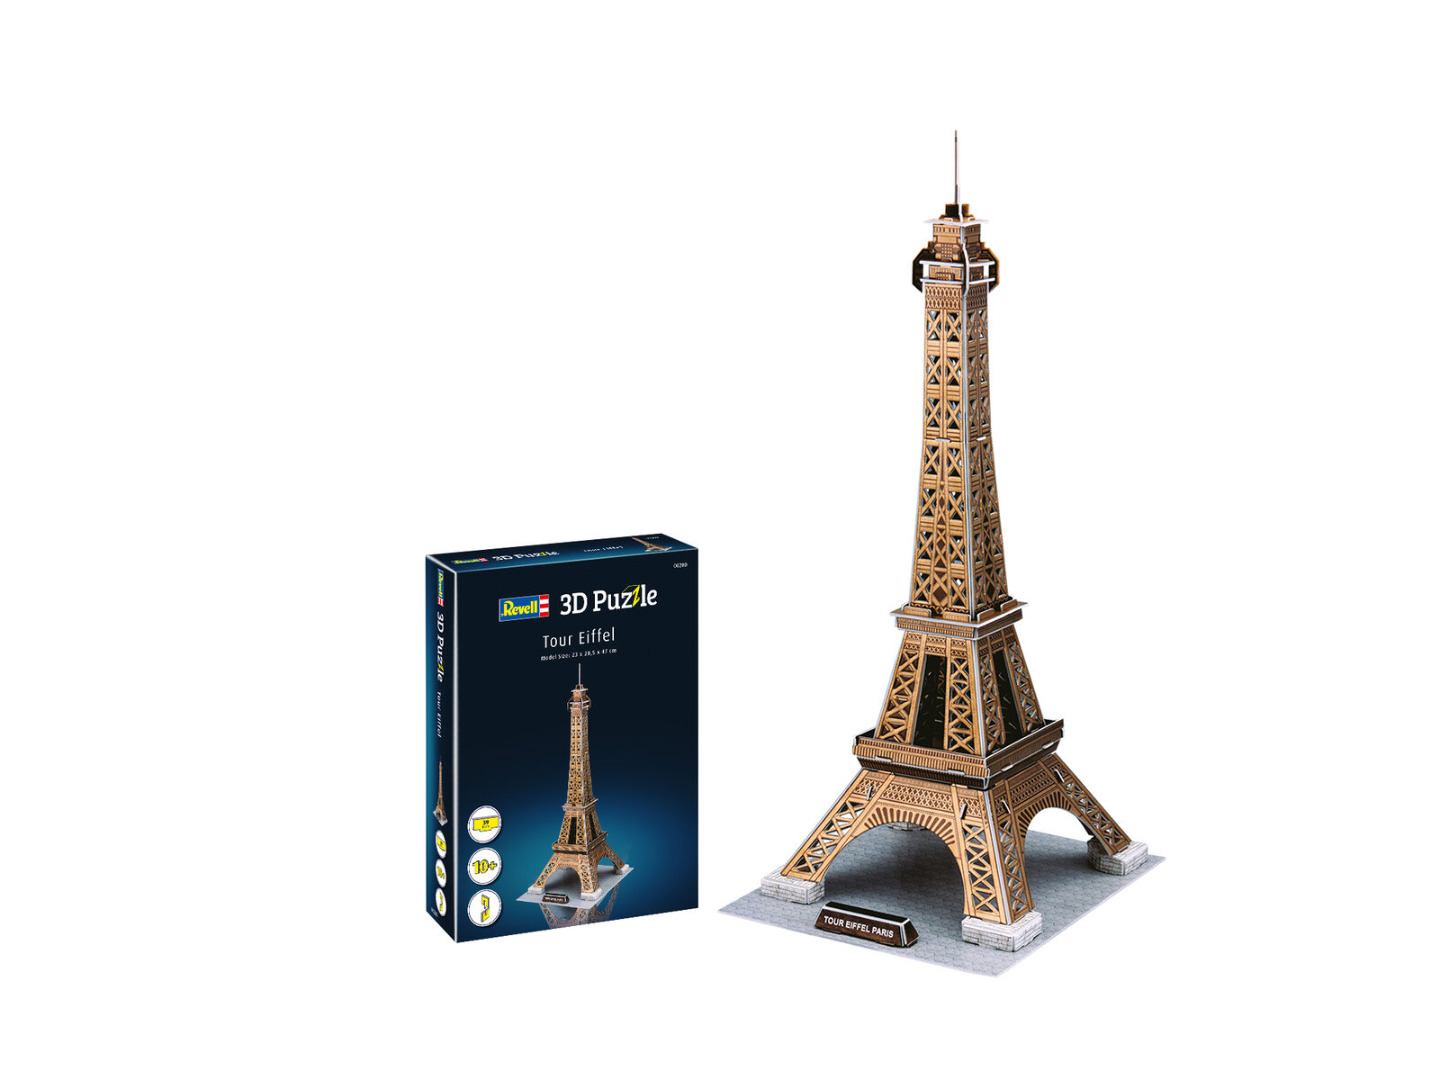 Revell 3D Puzzle The Eiffel Tower 23x20.5x47 cm